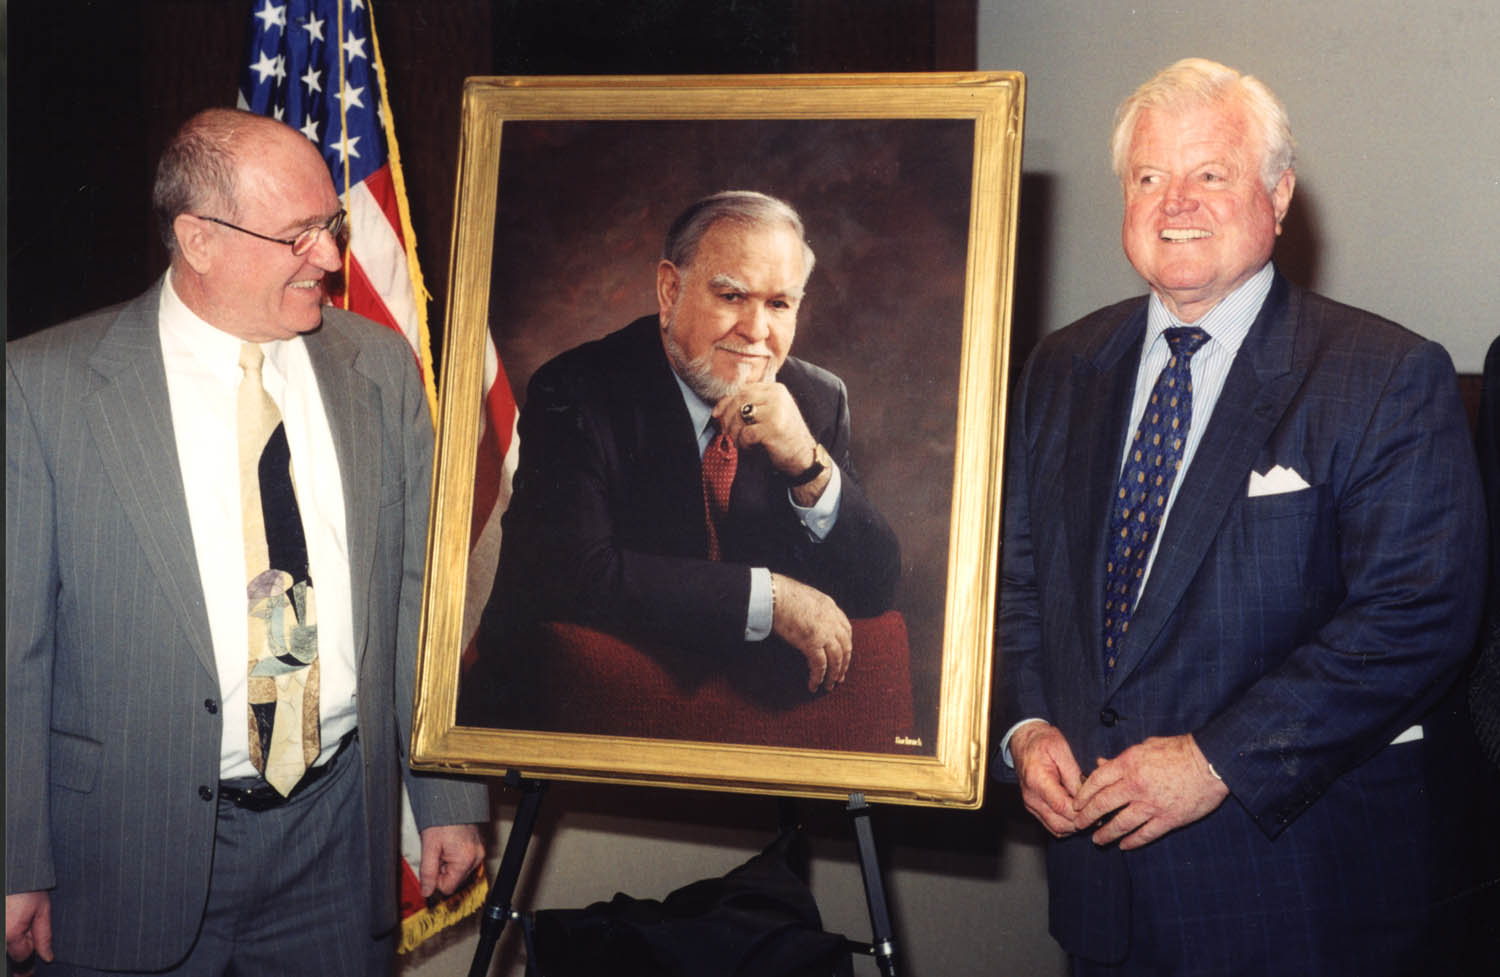 ted kennedy presenting Eli a picture of Joseph Moakly and the position of Scholar in Aging Eye Research